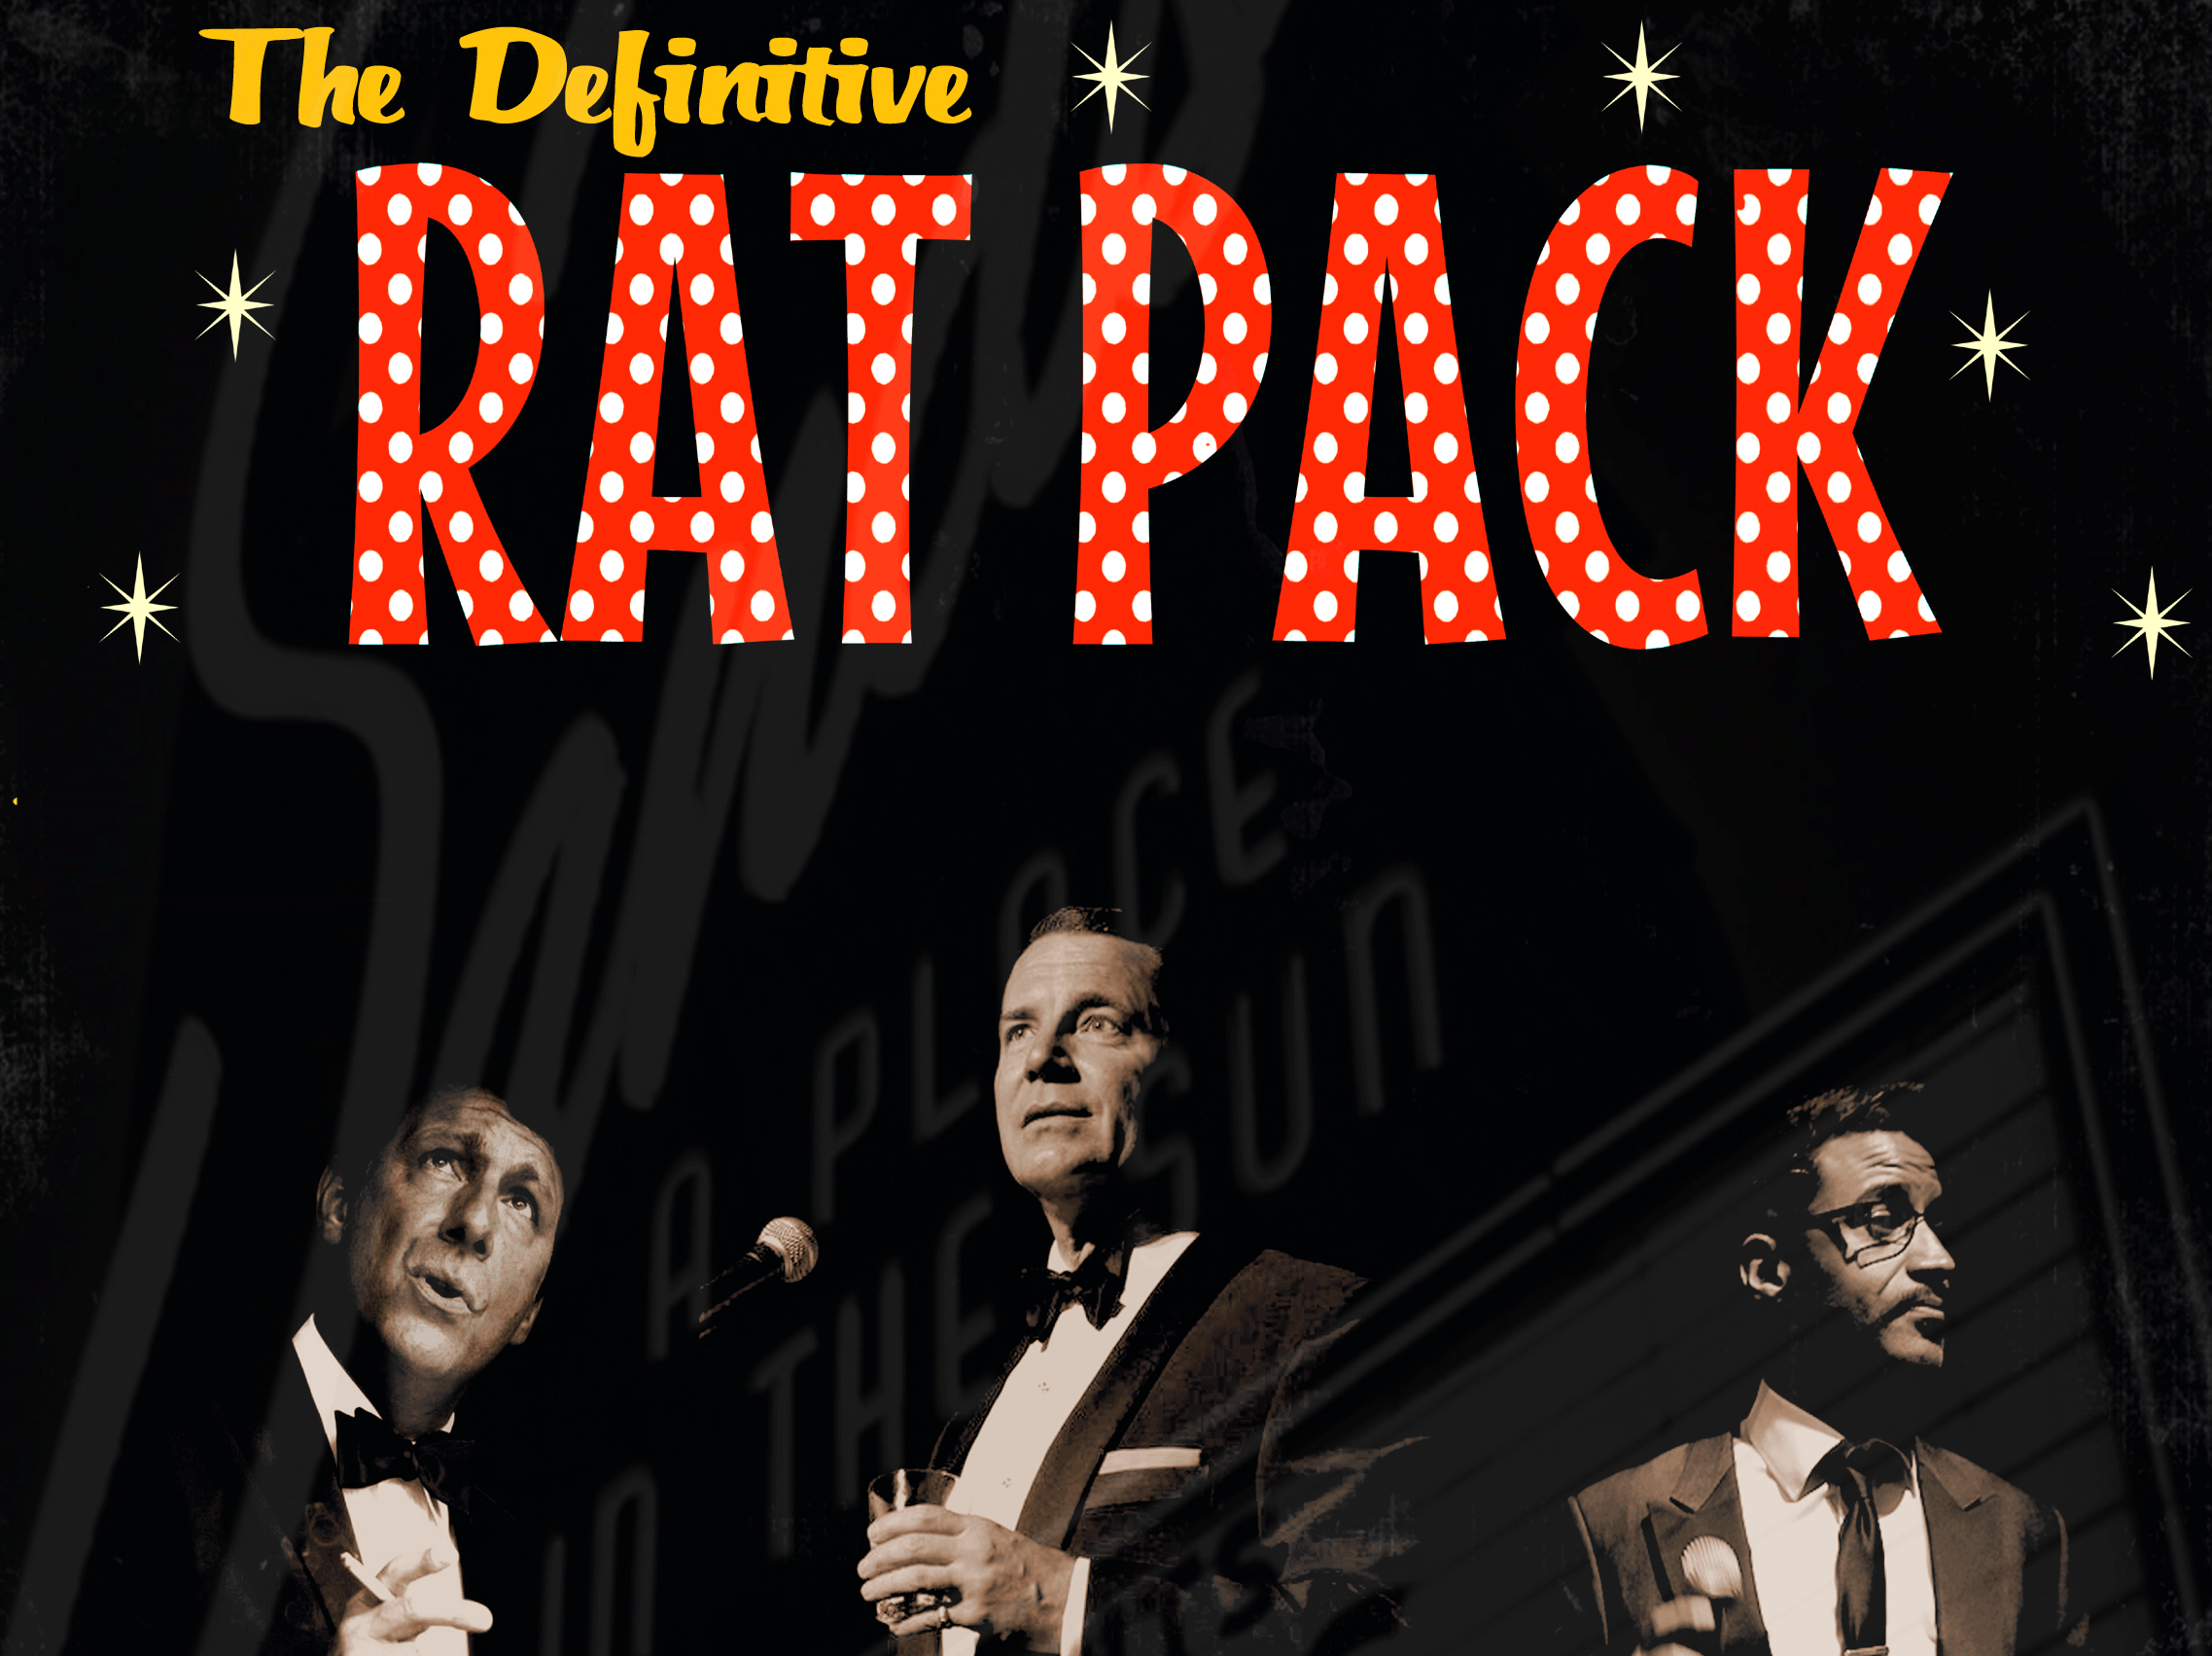 2275x1703 The Definitive Rat Pack Christmas Show London Tickets at Boisdale of Canary Wharf on 29th November 2022 | Ents24